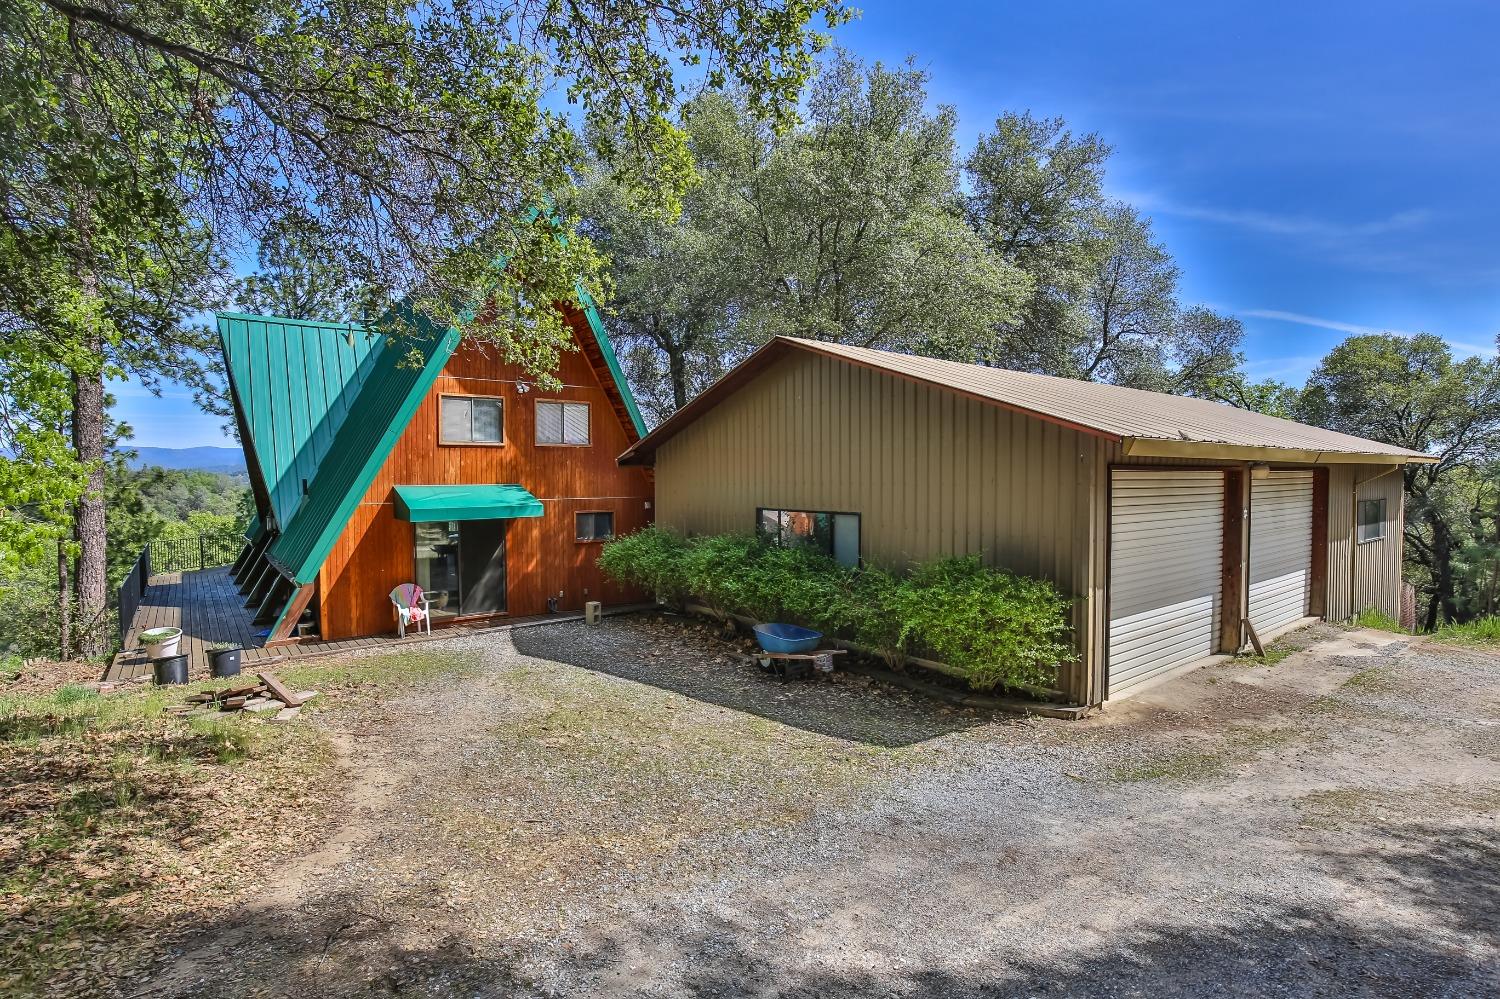 You can build a home anywhere, but you can't build a VIEW! Come enjoy the Majestic forever views of The Sierras & Pyramid Peak in this tranquil private setting on 5 acres. This multi level home has a great floor plan with 1,860 sq. ft. with 4 bedrooms and 2 1/2 baths, a good sized kitchen and large family room with a vaulted cathedral ceiling lined with pecky cedar wood & a cozy wood burning stove & large view windows. The downstairs features a large 600 sq. ft bonus room. The outdoors entertainers resort will astound you with over 1000 sq. ft. of decking, sparkling swimming pool, tiki bar and more. The oversized Garage is 900 sq. ft. plus it has a 600 sq. ft. workshop too! near year round pond. There is also a pole barn for your extra toys and a chicken coop too. the home has 100 year metal roof. Only 15 minutes to hwy 50 and 1 hour to Lake Tahoe & close to the wine Country. The list goes on and on. You will never even want to leave home! A MUST SEE!